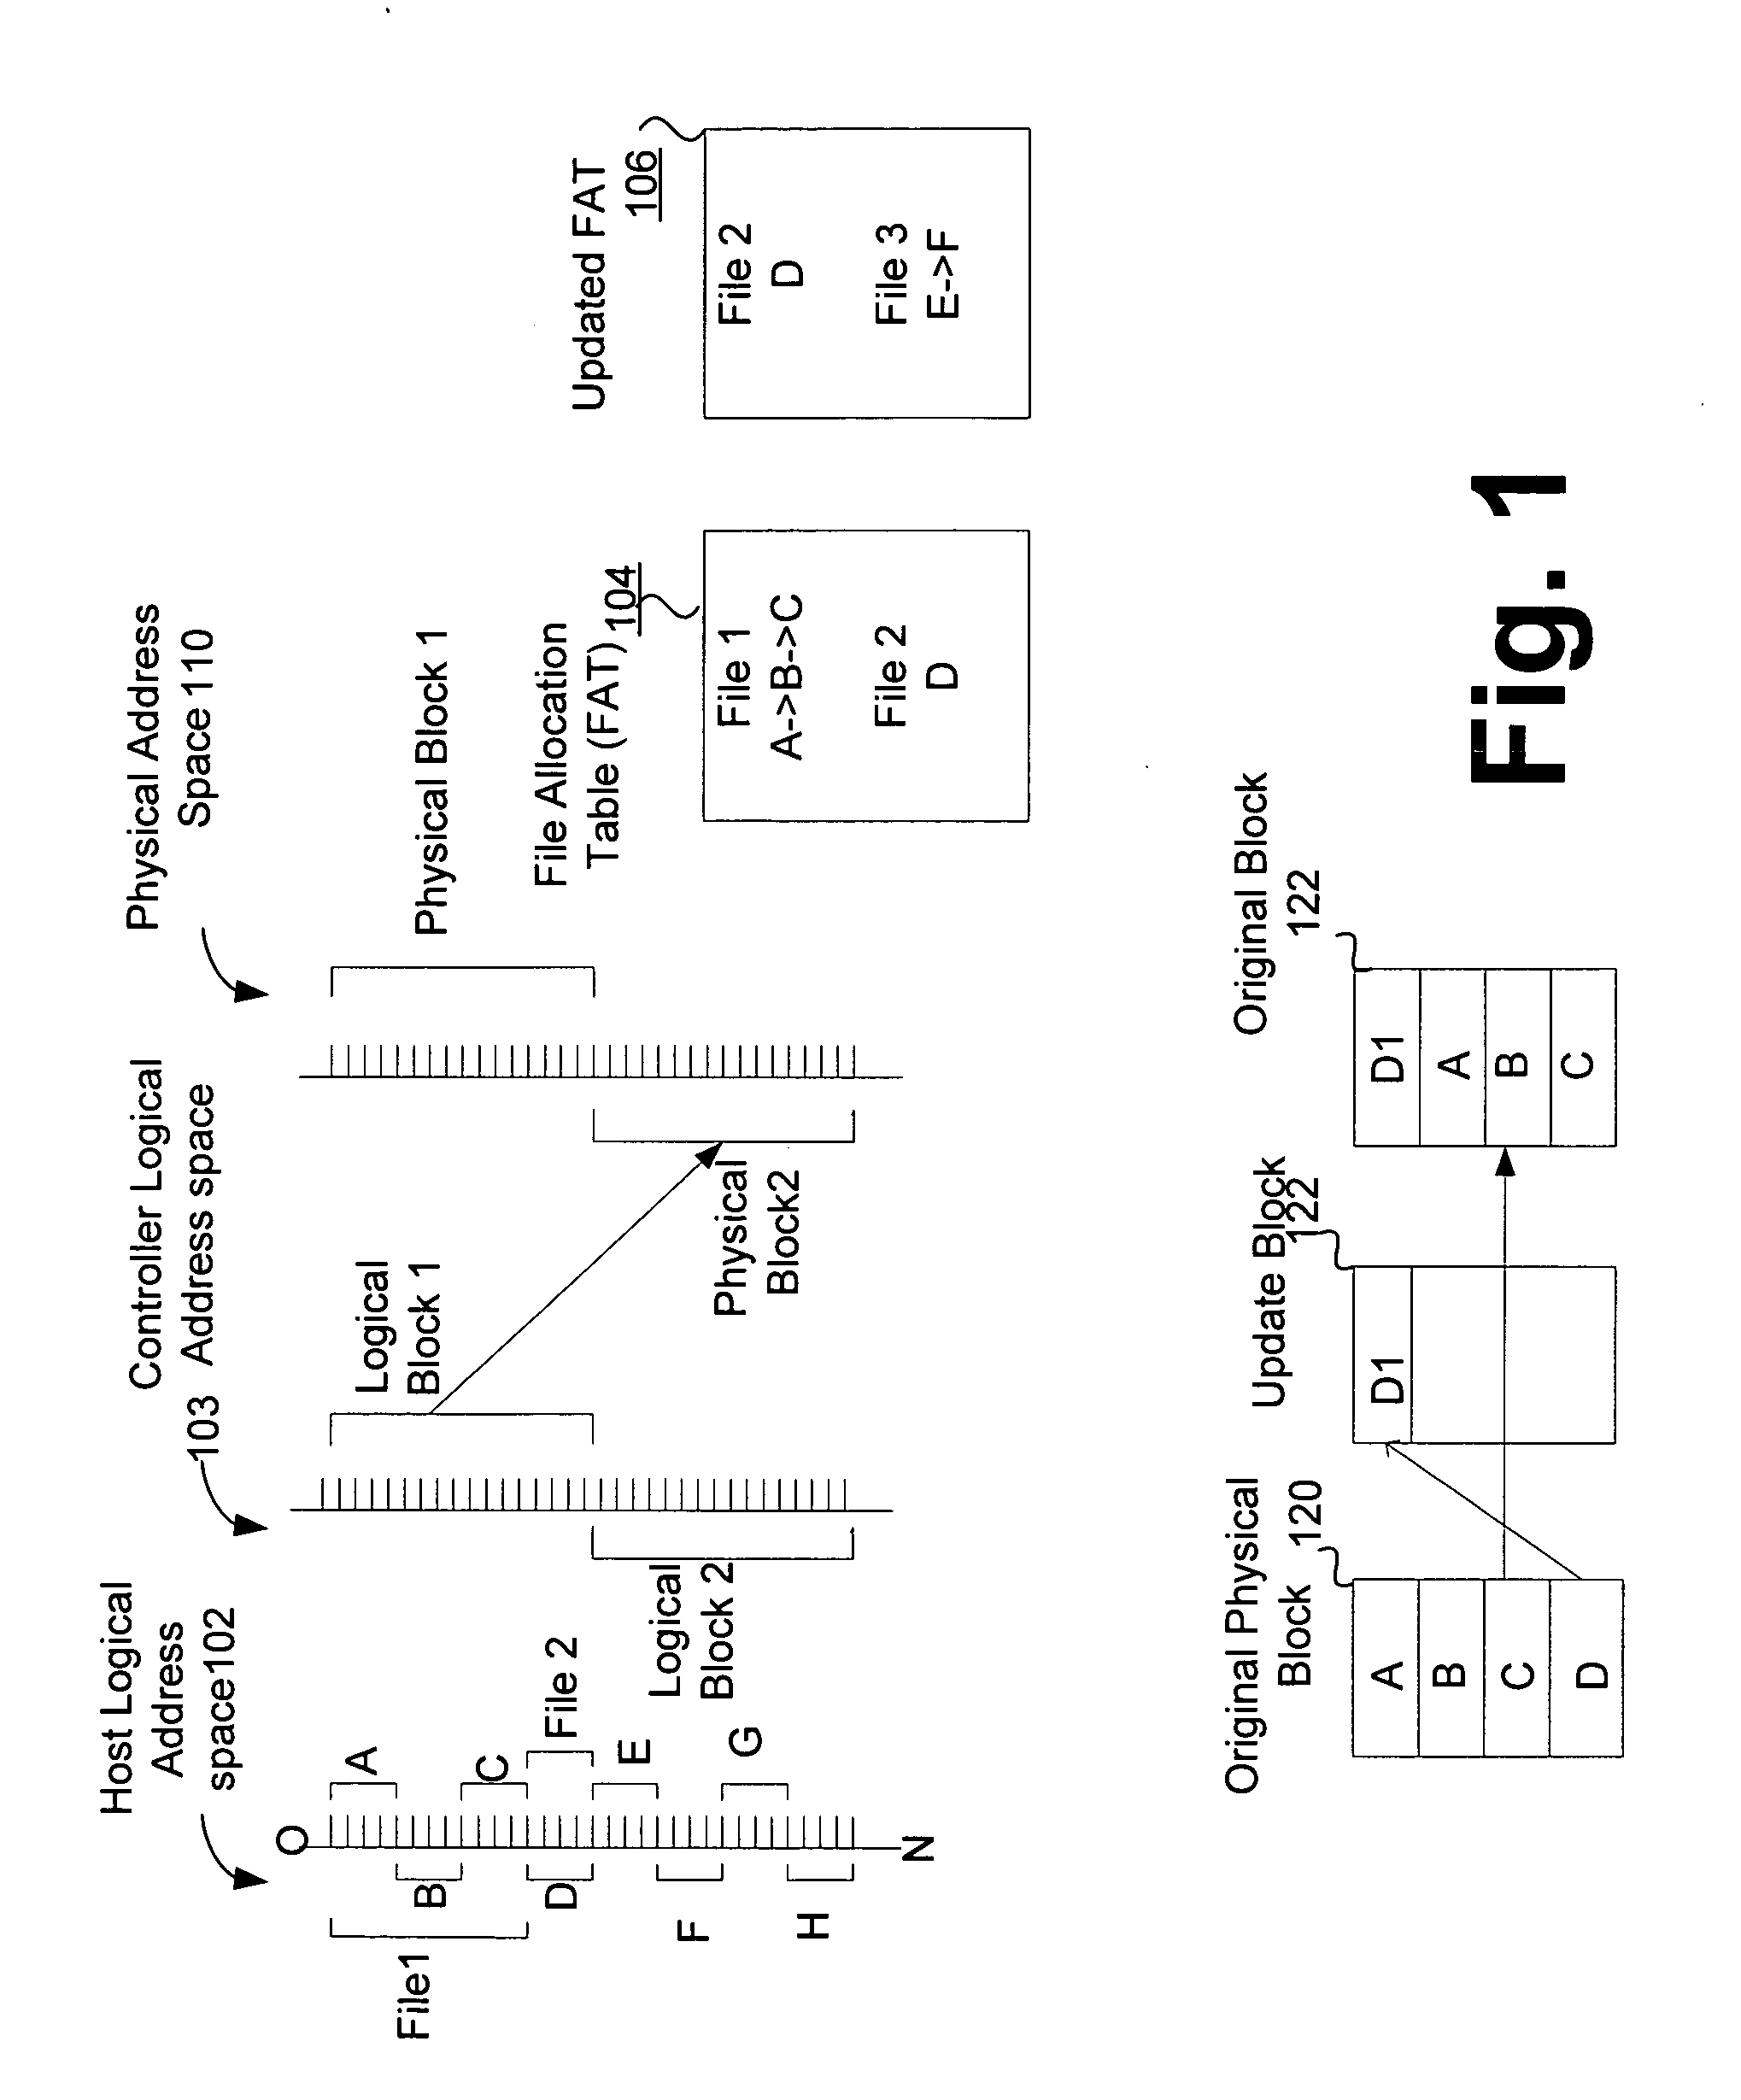 Method and apparatus for maintaining data on non-volatile memory systems